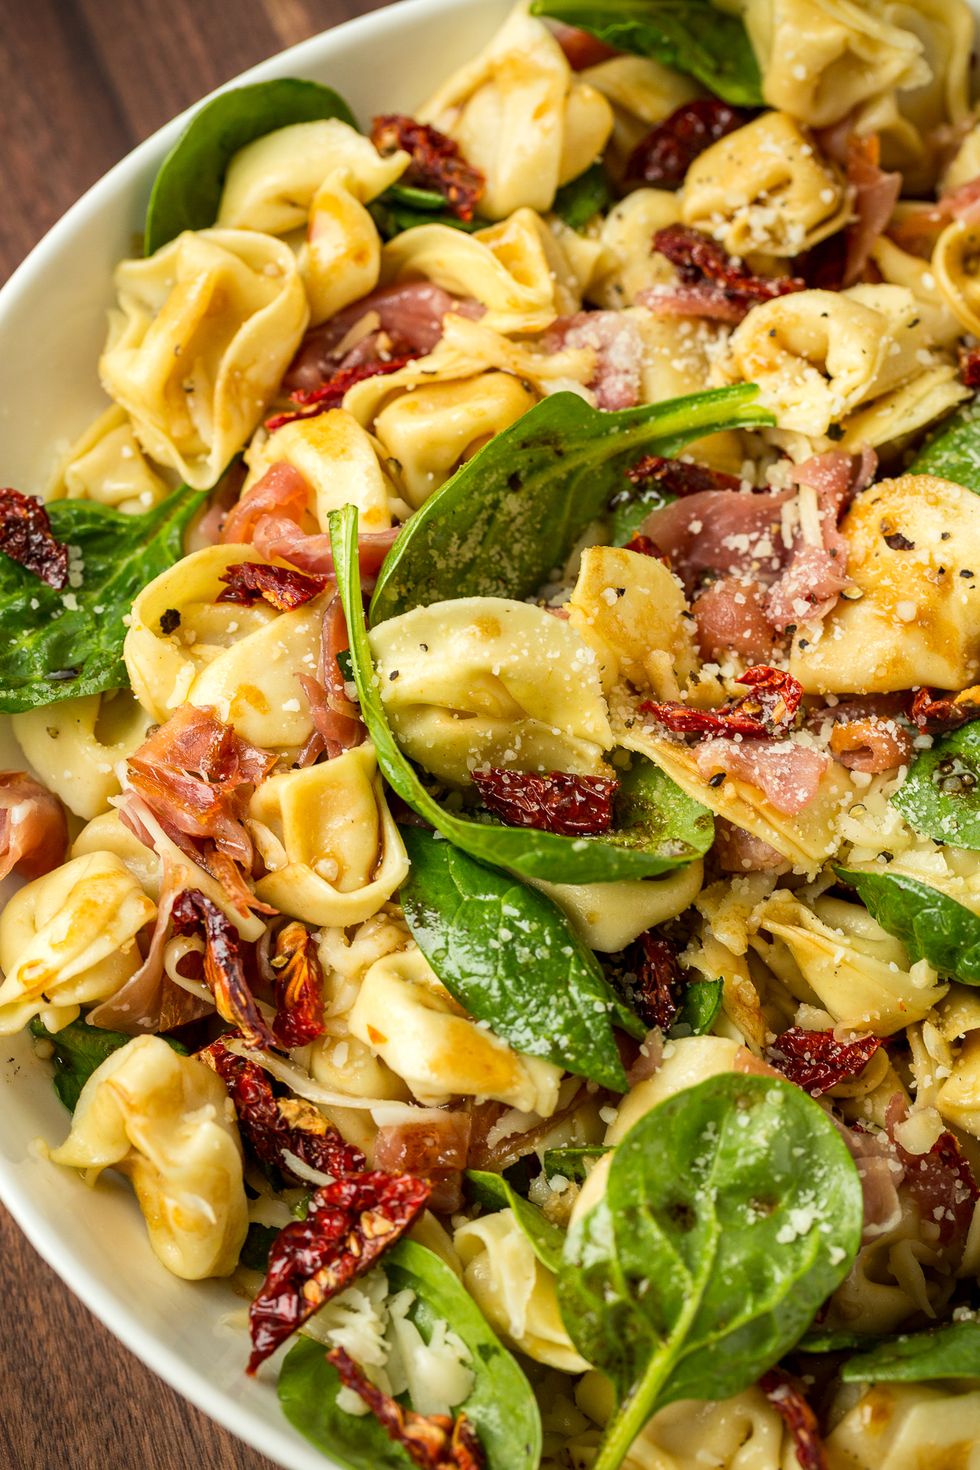 tortellini salad with spinach, sundried tomatoes, prosciutto, and parmesan